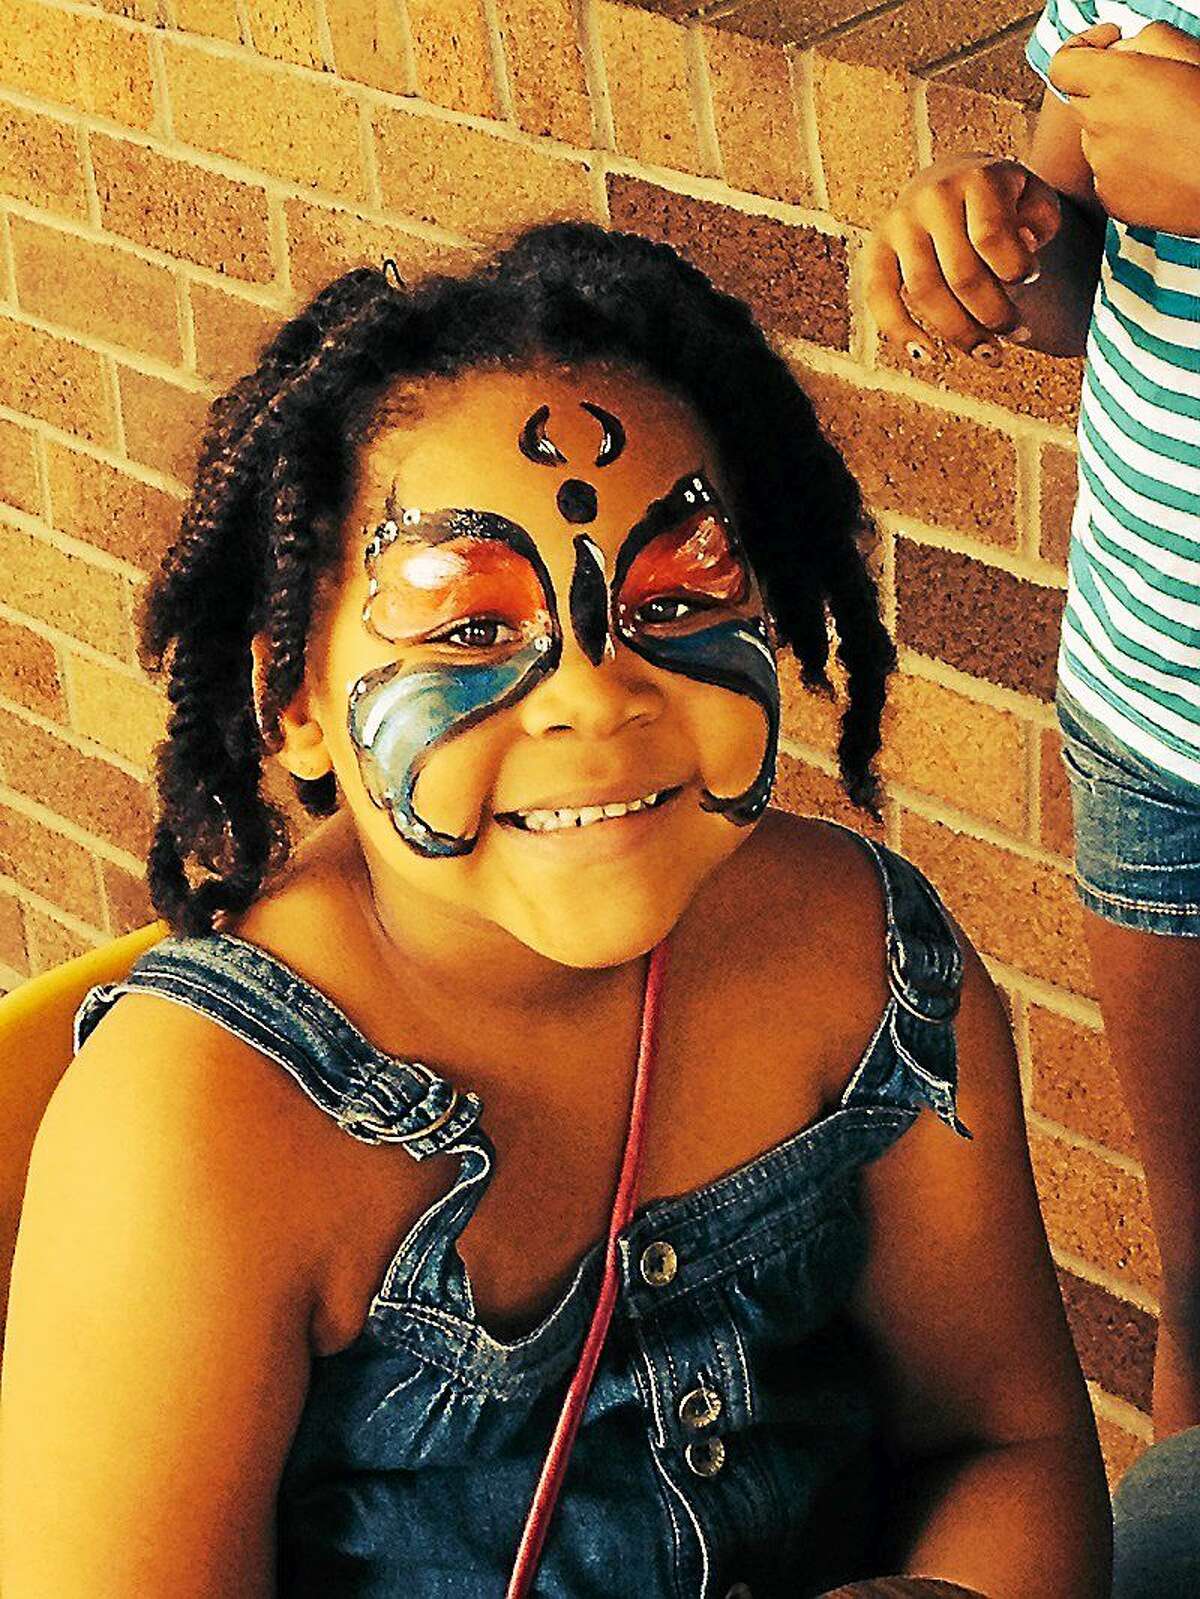 Arayia Tavares had her hair done at home, but her face painted at Transformerz Barbershop.